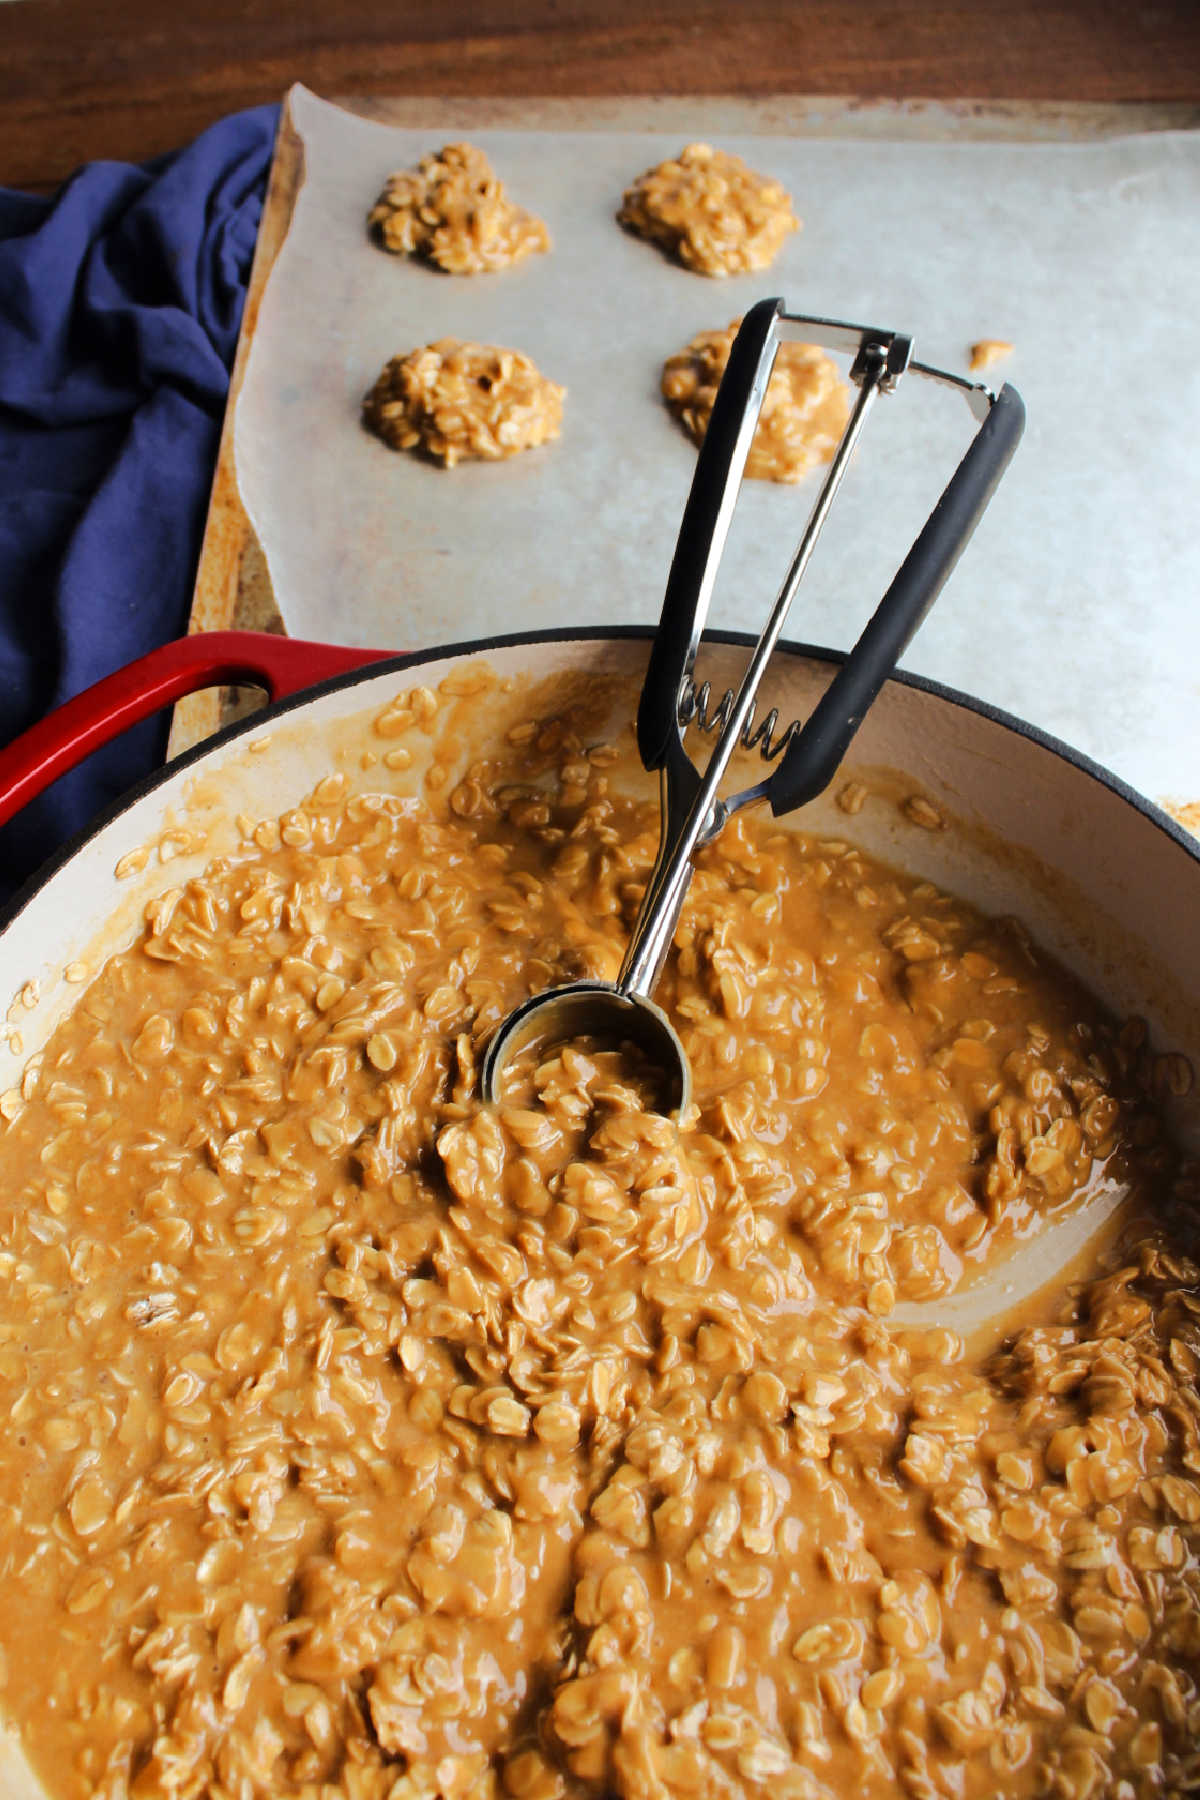 Using cookie scoop to portion out hot peanut butter and oatmeal mixture onto wax paper to form cookies.